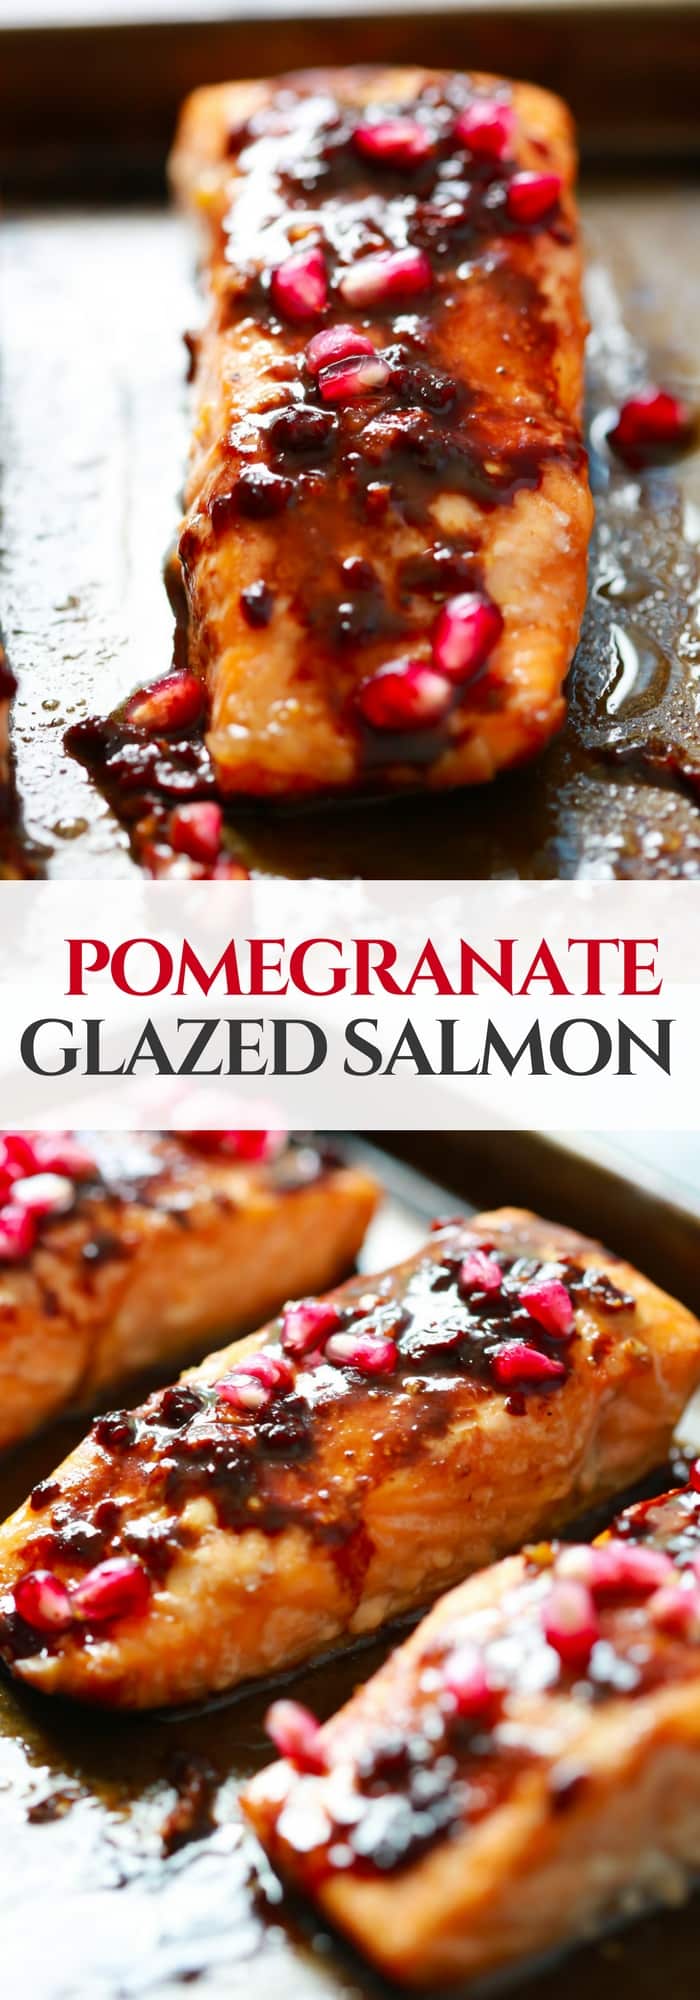 The easiest Pomegranate Glazed Salmon you will ever make. It only requires 4-ingredient and the glaze has no added sugar, but has a delicious tangy flavor!